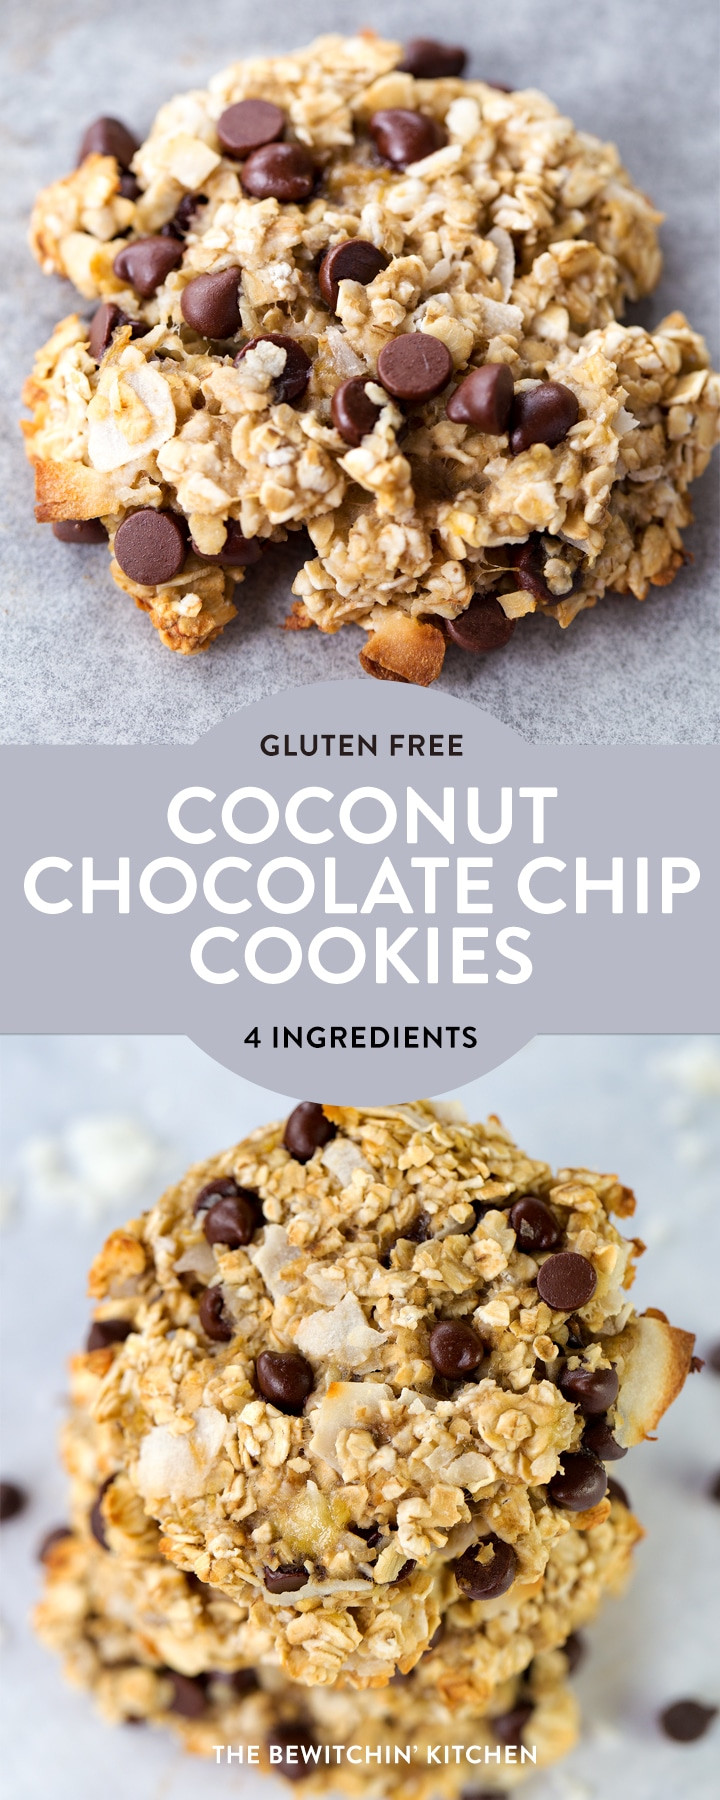 Healthy Gluten Free Cookie Recipes
 4 Ingre nt Gluten Free Coconut Chocolate Chip Cookies